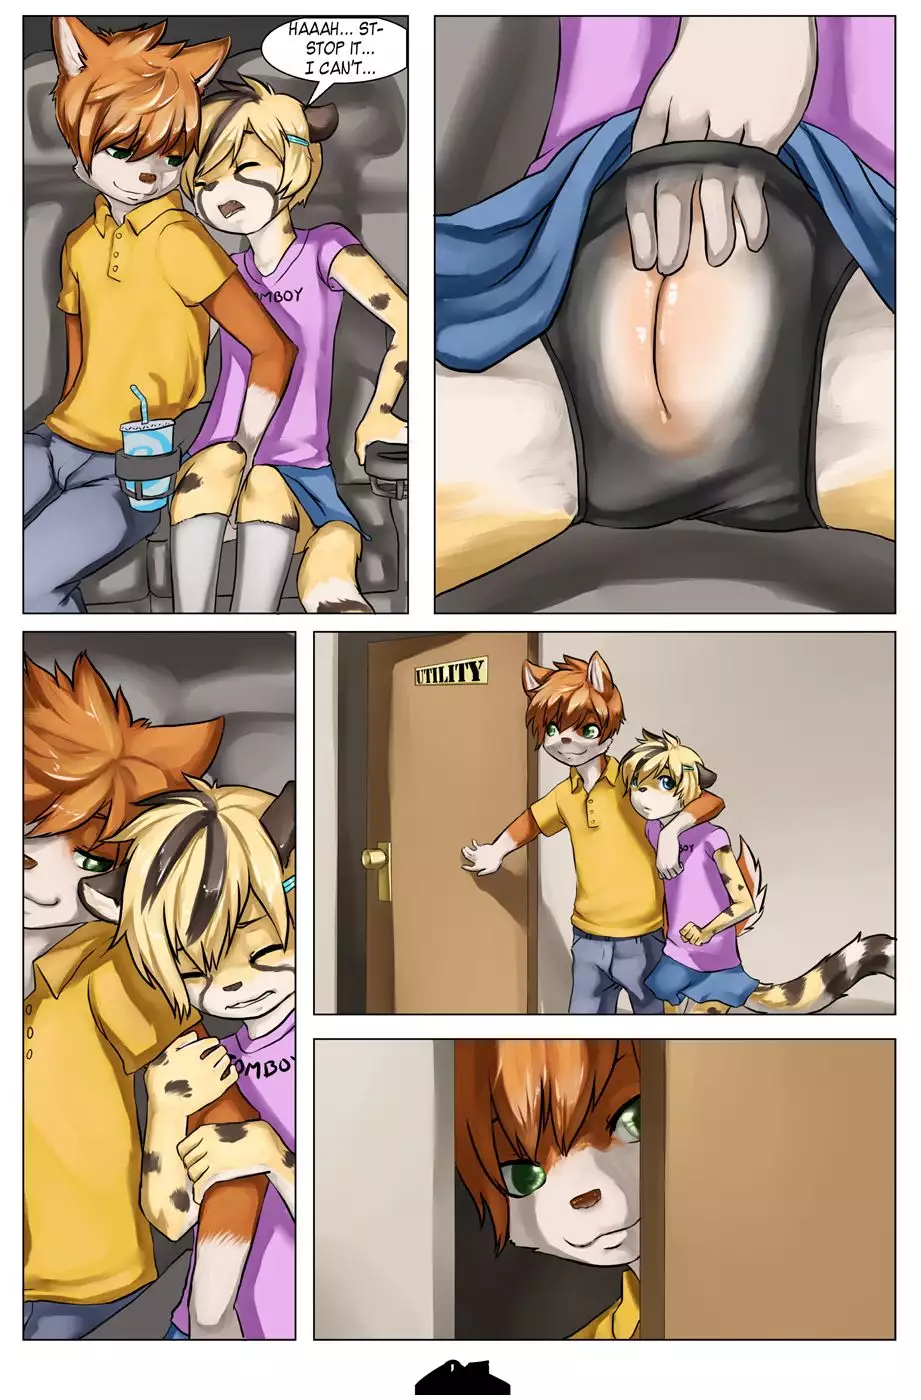 Just a Bunch of Guys Furry Yiff Comic.